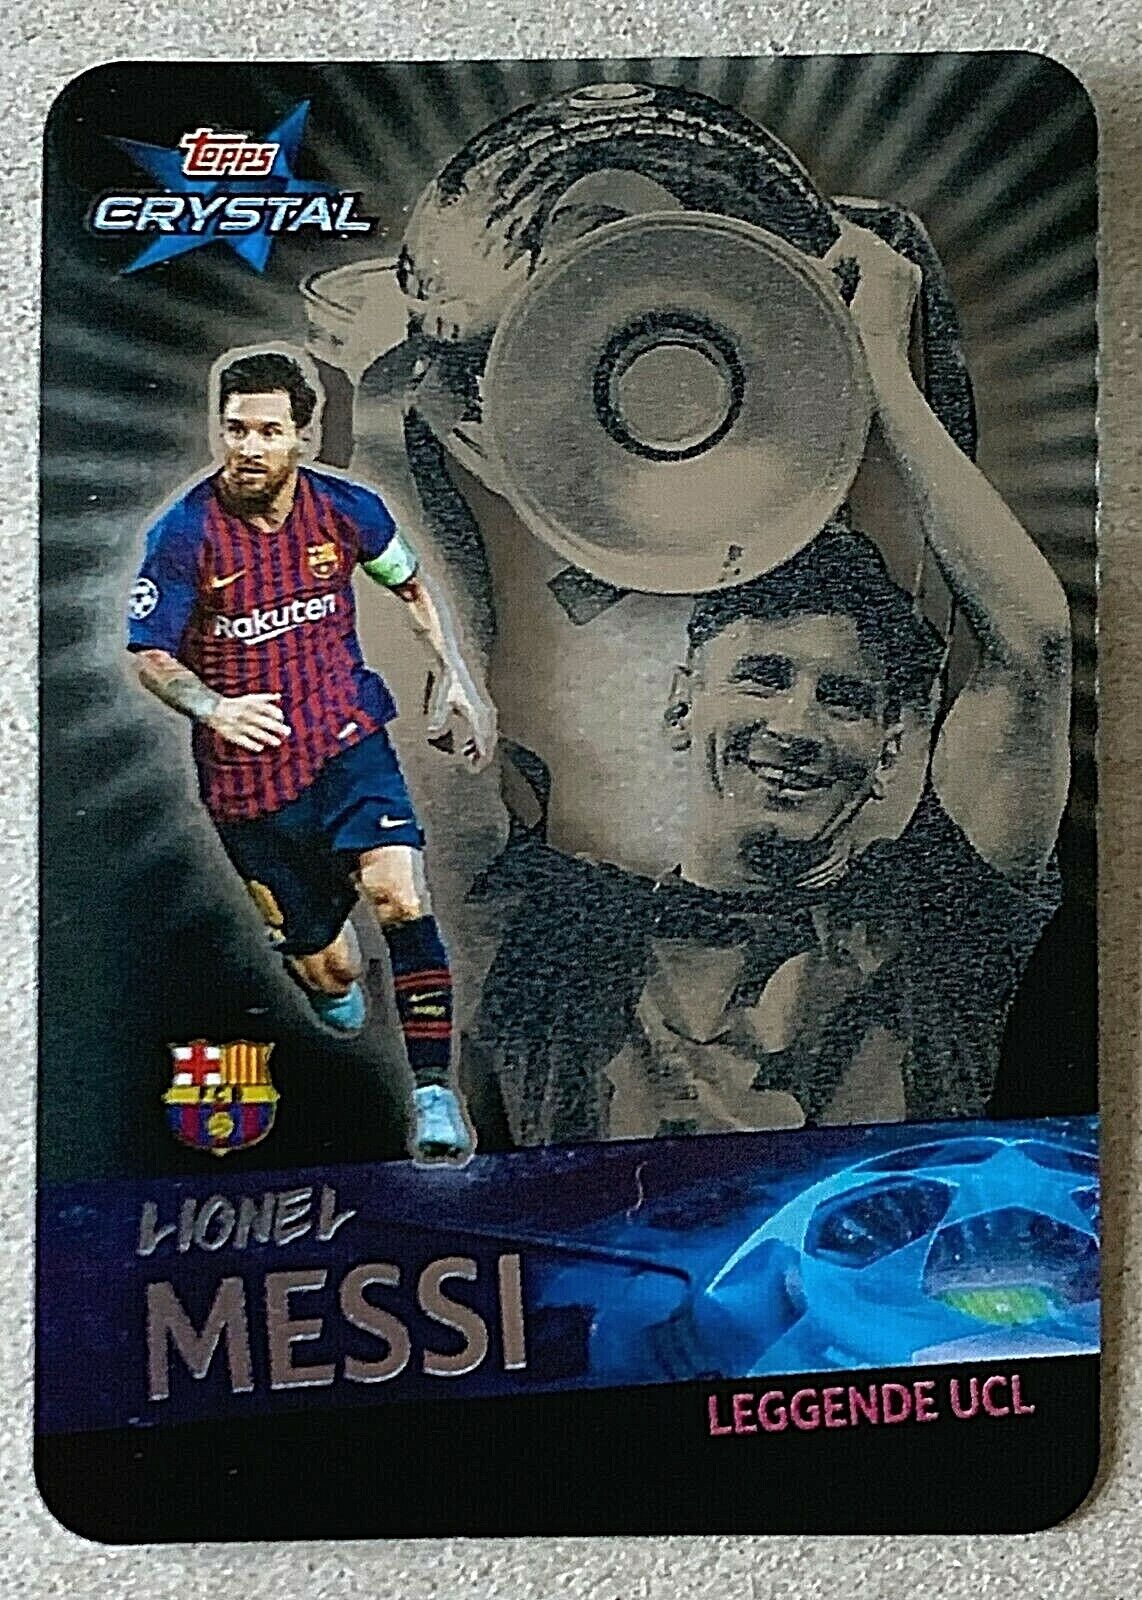 2018-19 Topps Crystal UEFA Champions, Lionel Messi #122 (Delux Transparent Card)